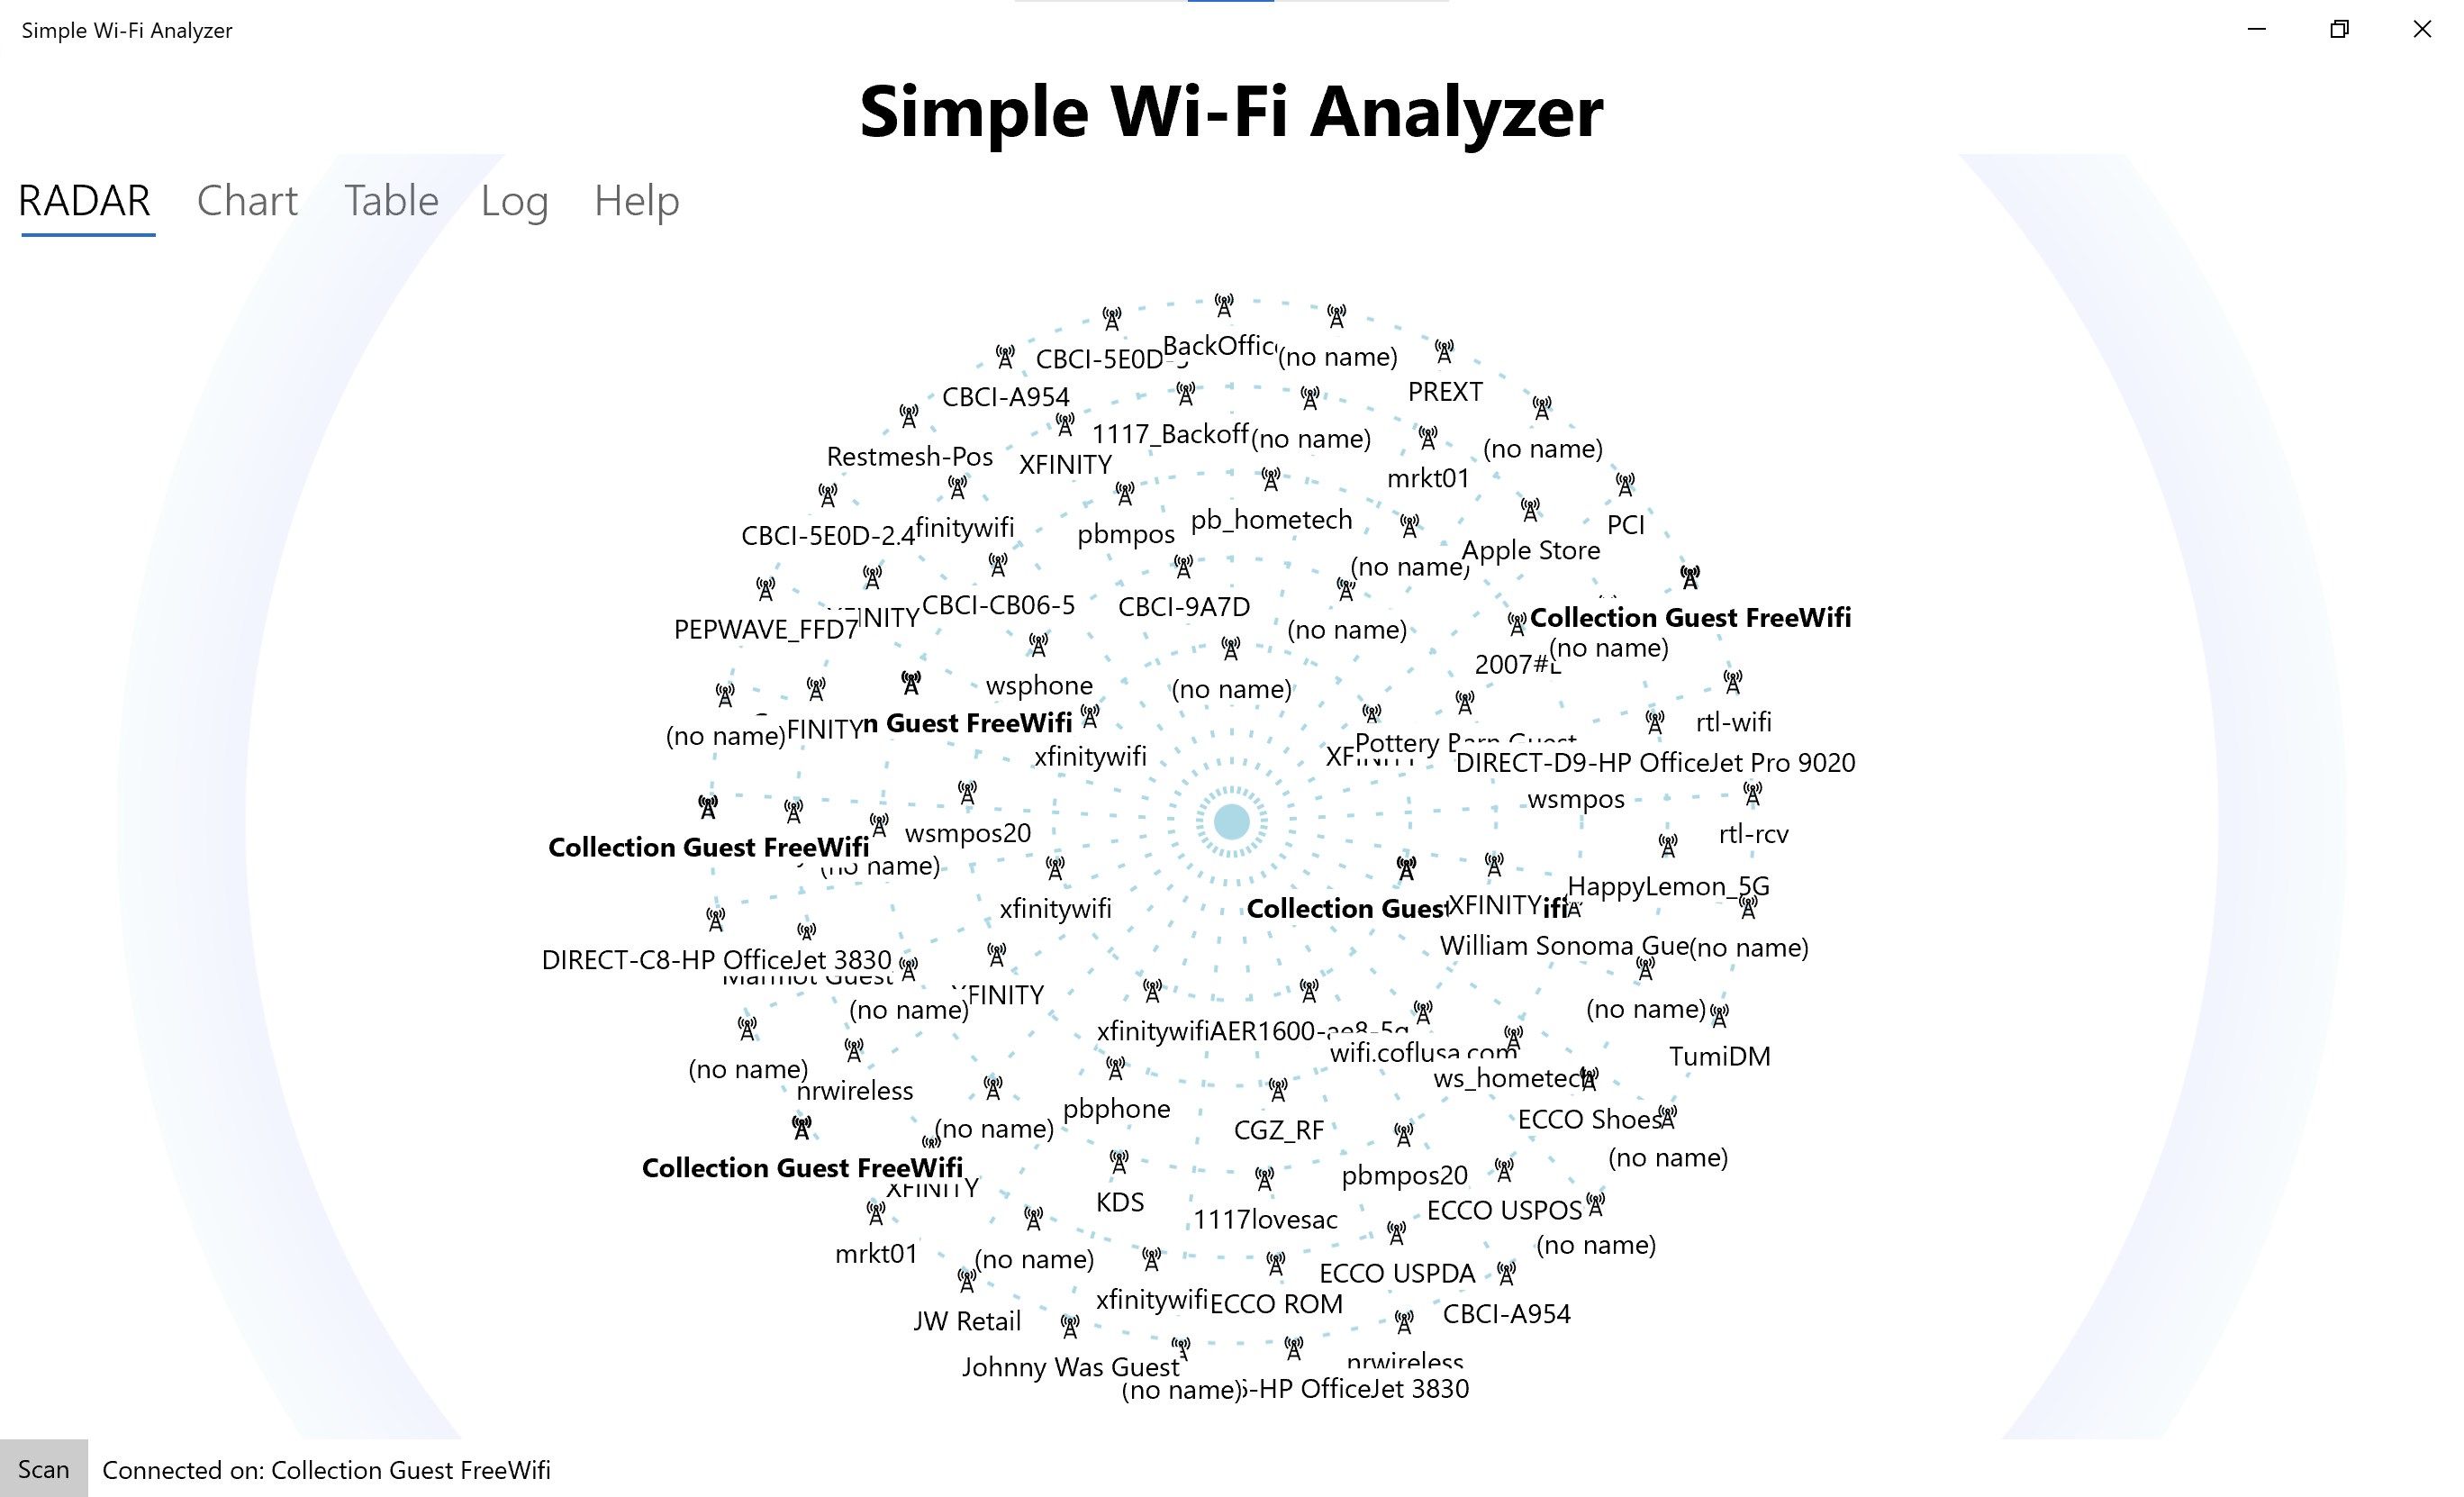 RADAR display shows all Wi-Fi access points (APs), sorted by signal strength